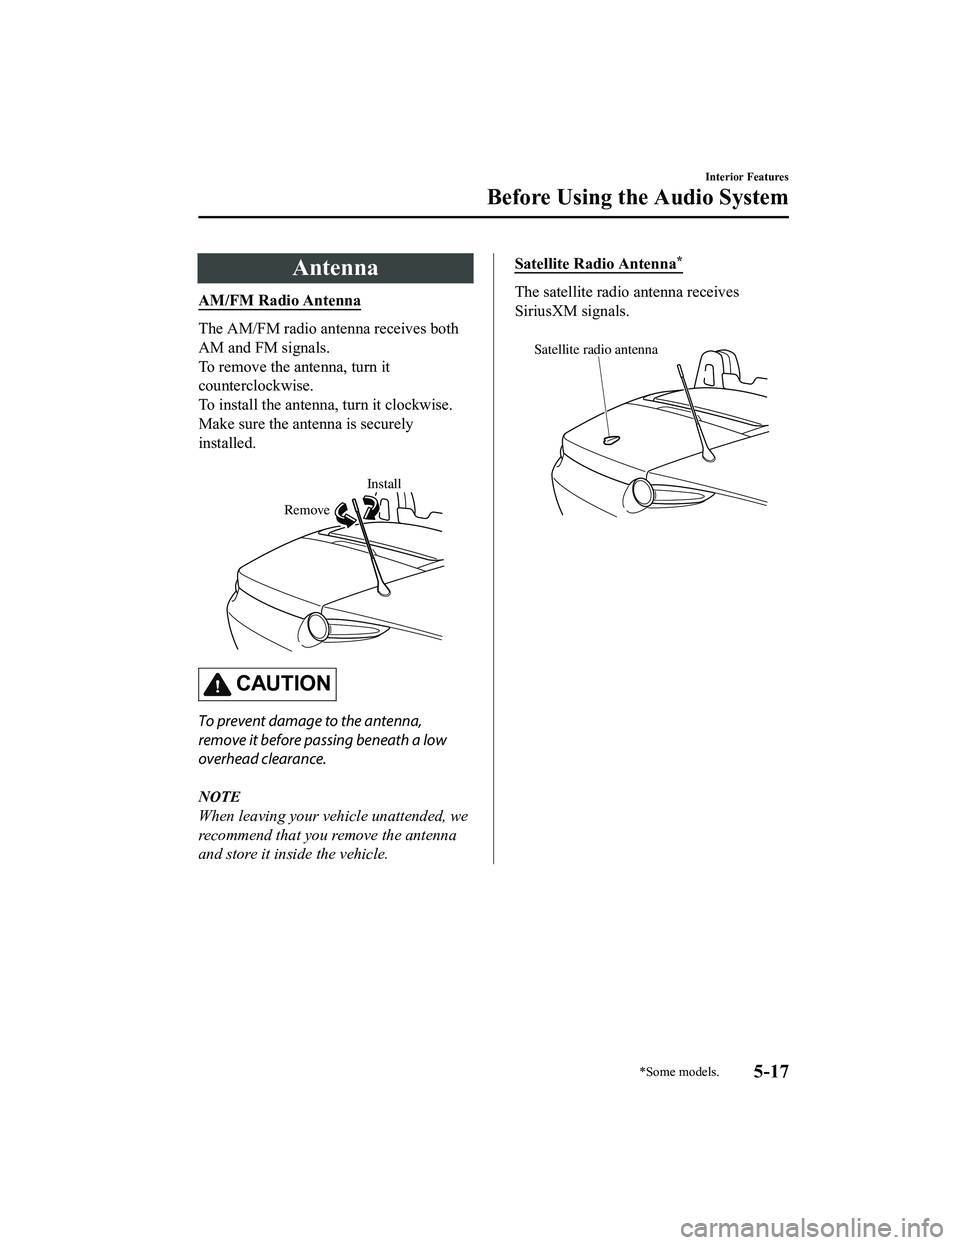 MAZDA MODEL MX-5 MIATA RF 2020  Owners Manual Antenna
AM/FM Radio Antenna
The AM/FM radio antenna receives both
AM and FM signals.
To remove the antenna, turn it
counterclockwise.
To install the antenna, turn it clockwise.
Make sure the antenna i